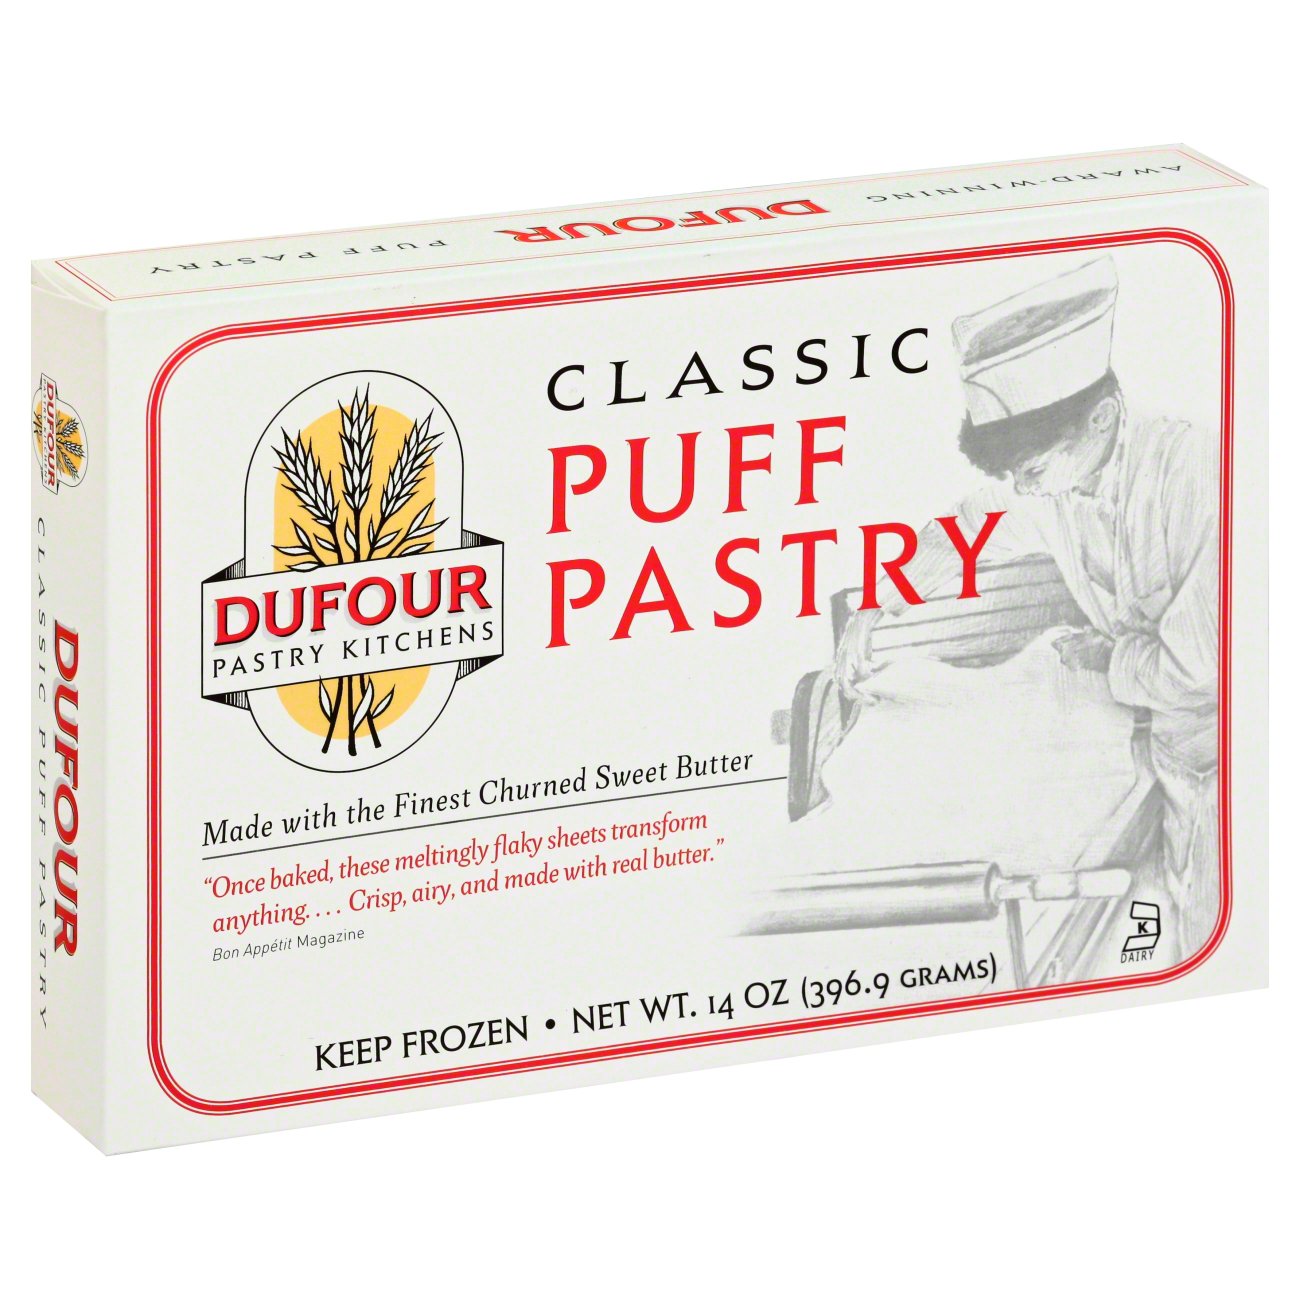 The Best Frozen Puff Pastry is Dufour Pastry Kitchen